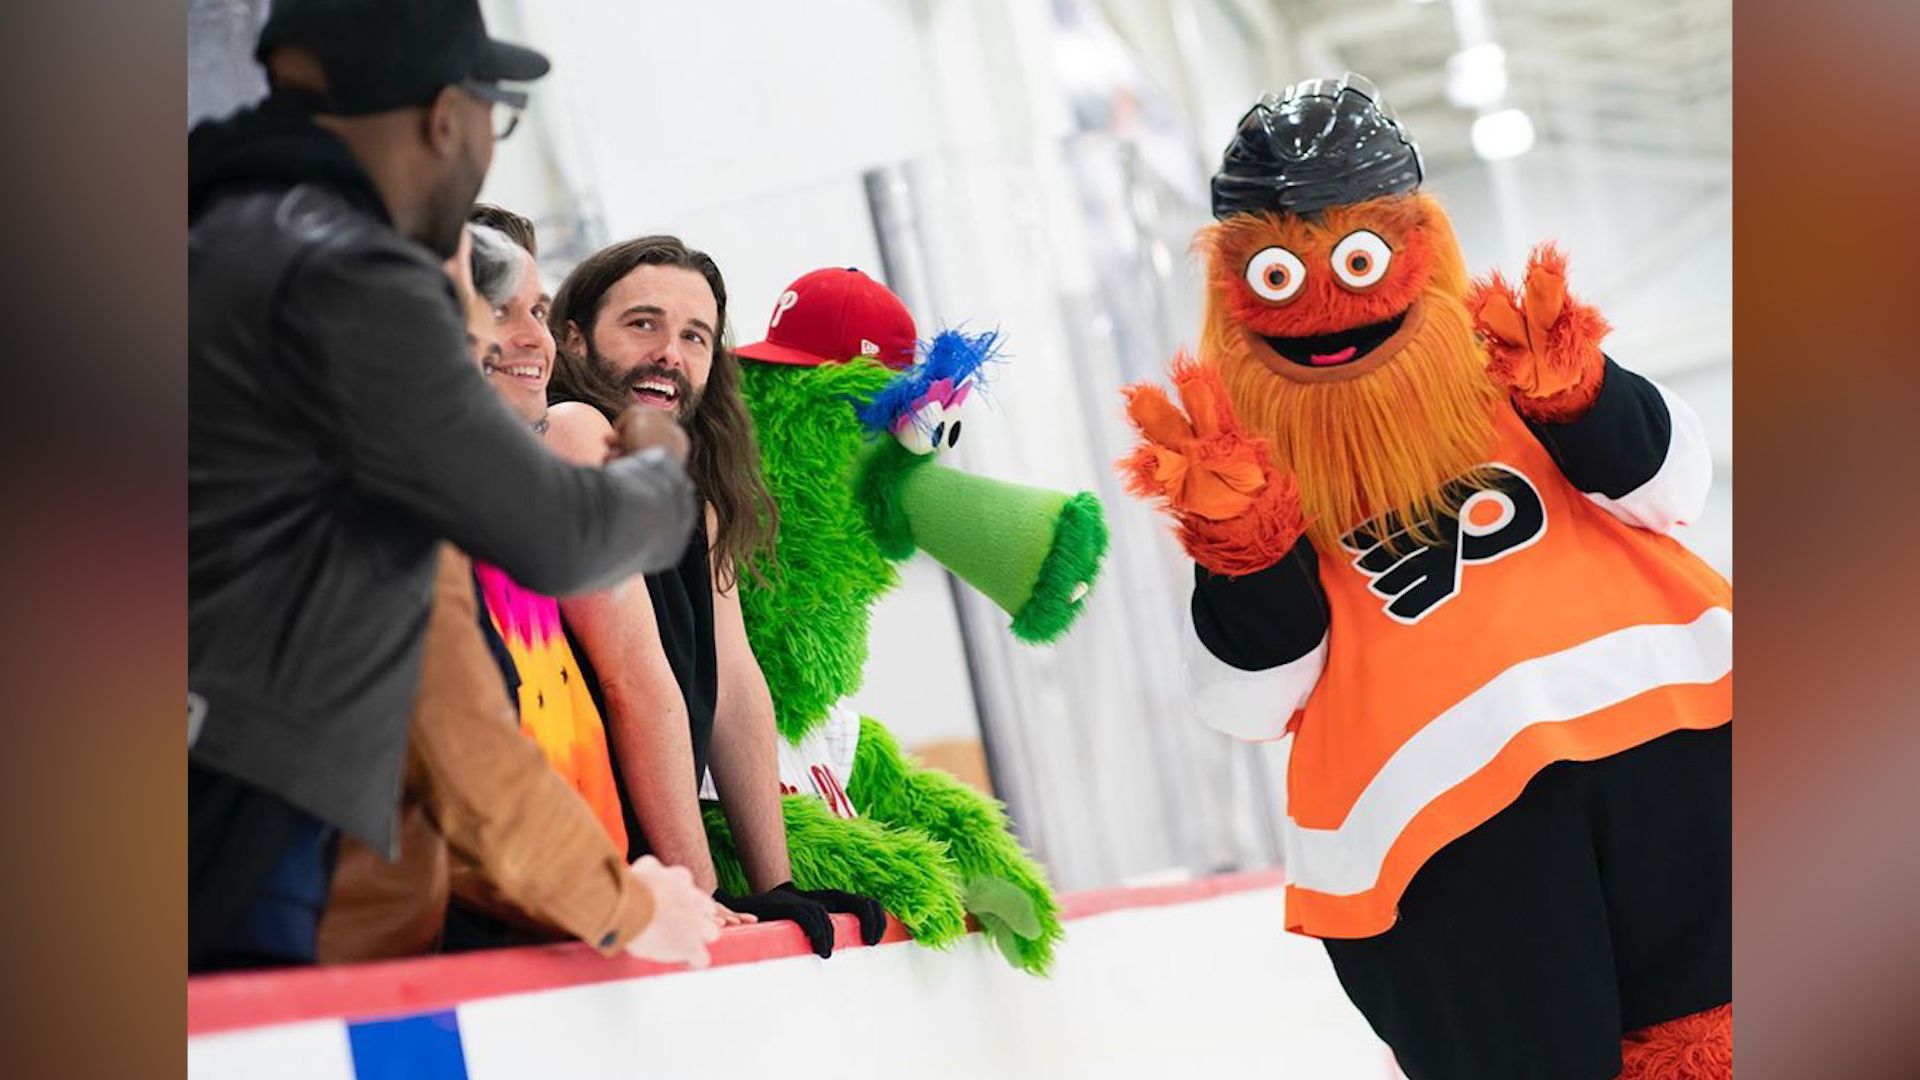 Watch the 'Queer Eye' team give the Flyers' mascot a makeover